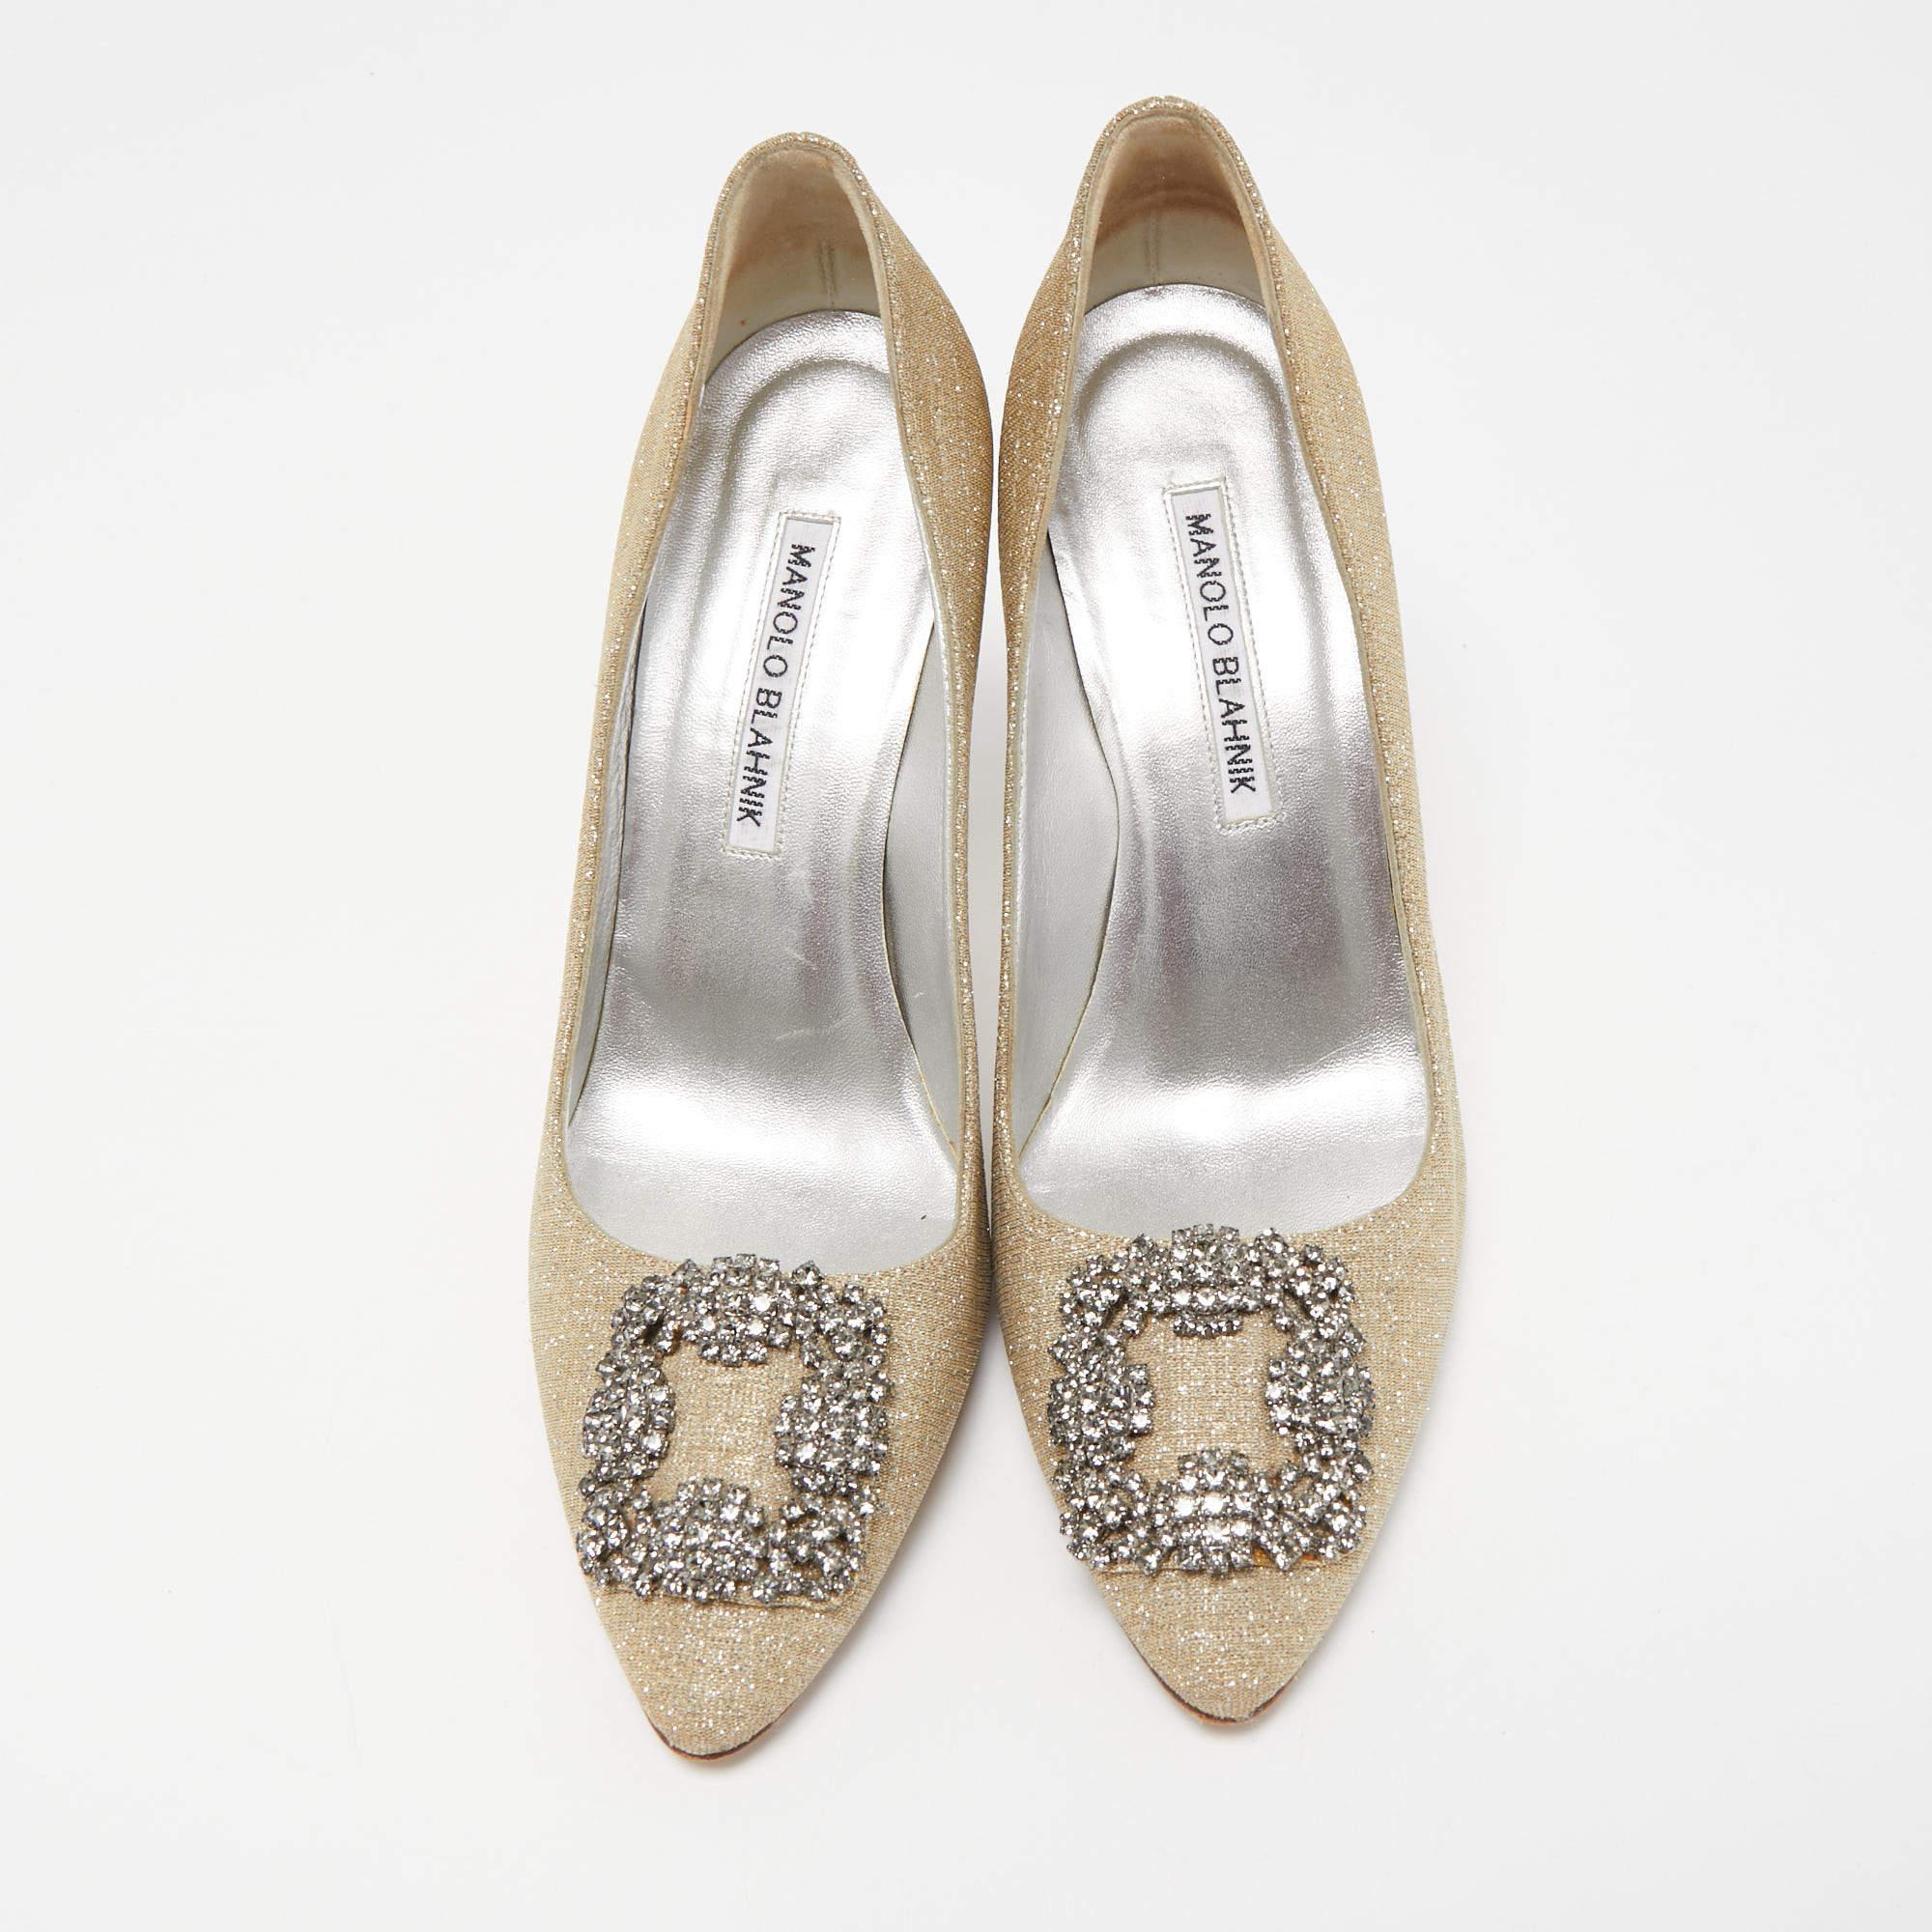 Wonderfully-crafted shoes added with notable elements to fit well and pair perfectly with all your plans. Make these Manolo Blahnik glitter pumps yours today!

